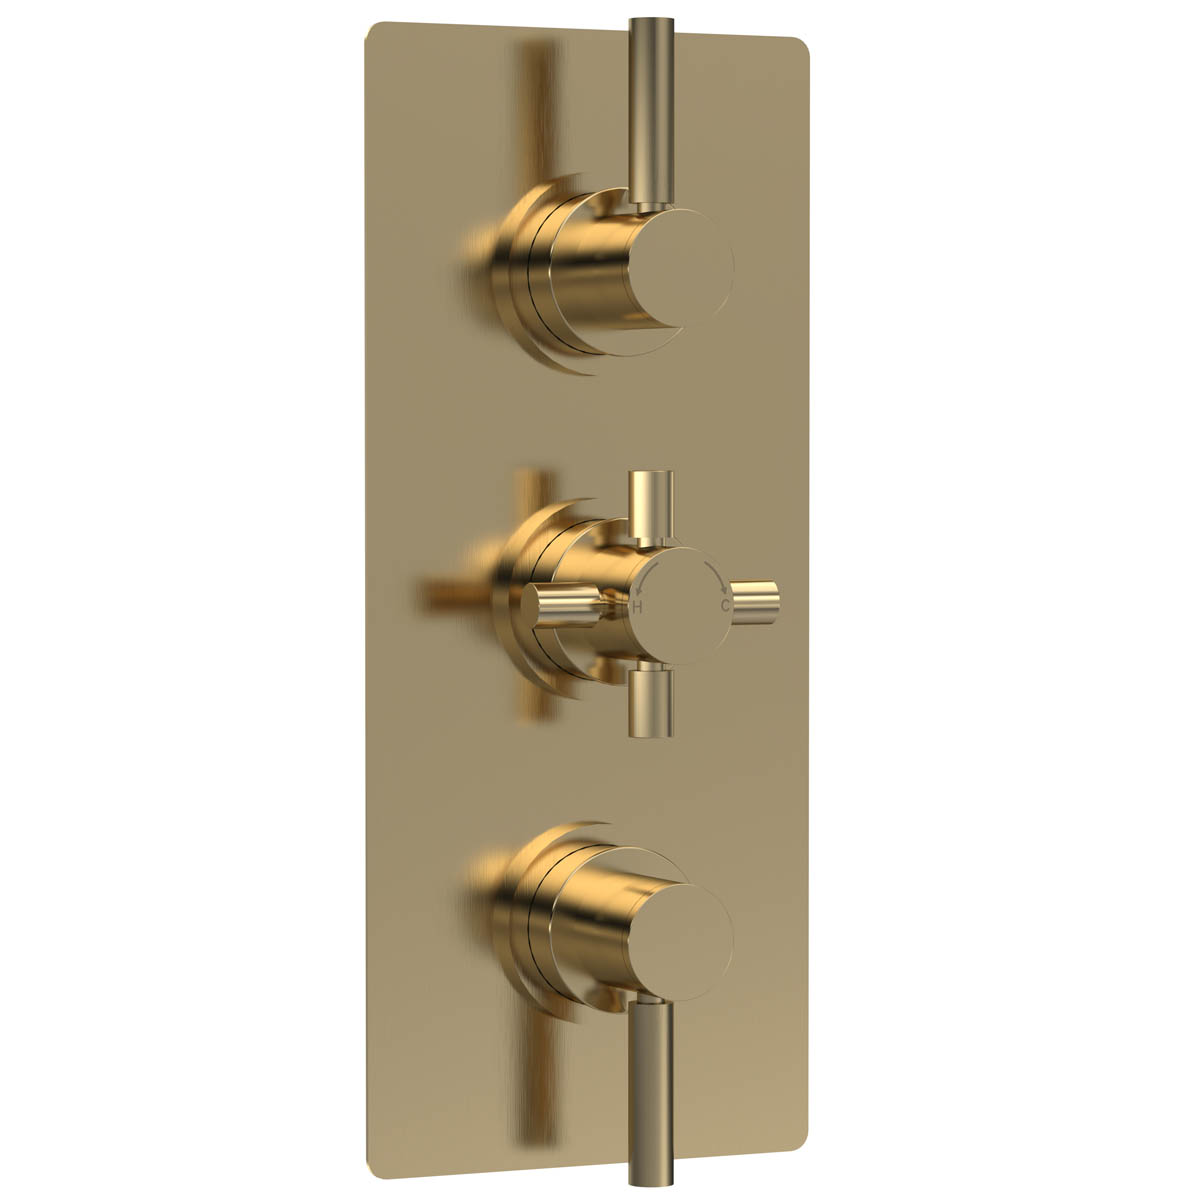 Hudson Reed Tec Pura Triple Thermostatic Shower Valve With Diverter - Brushed Brass (18793)